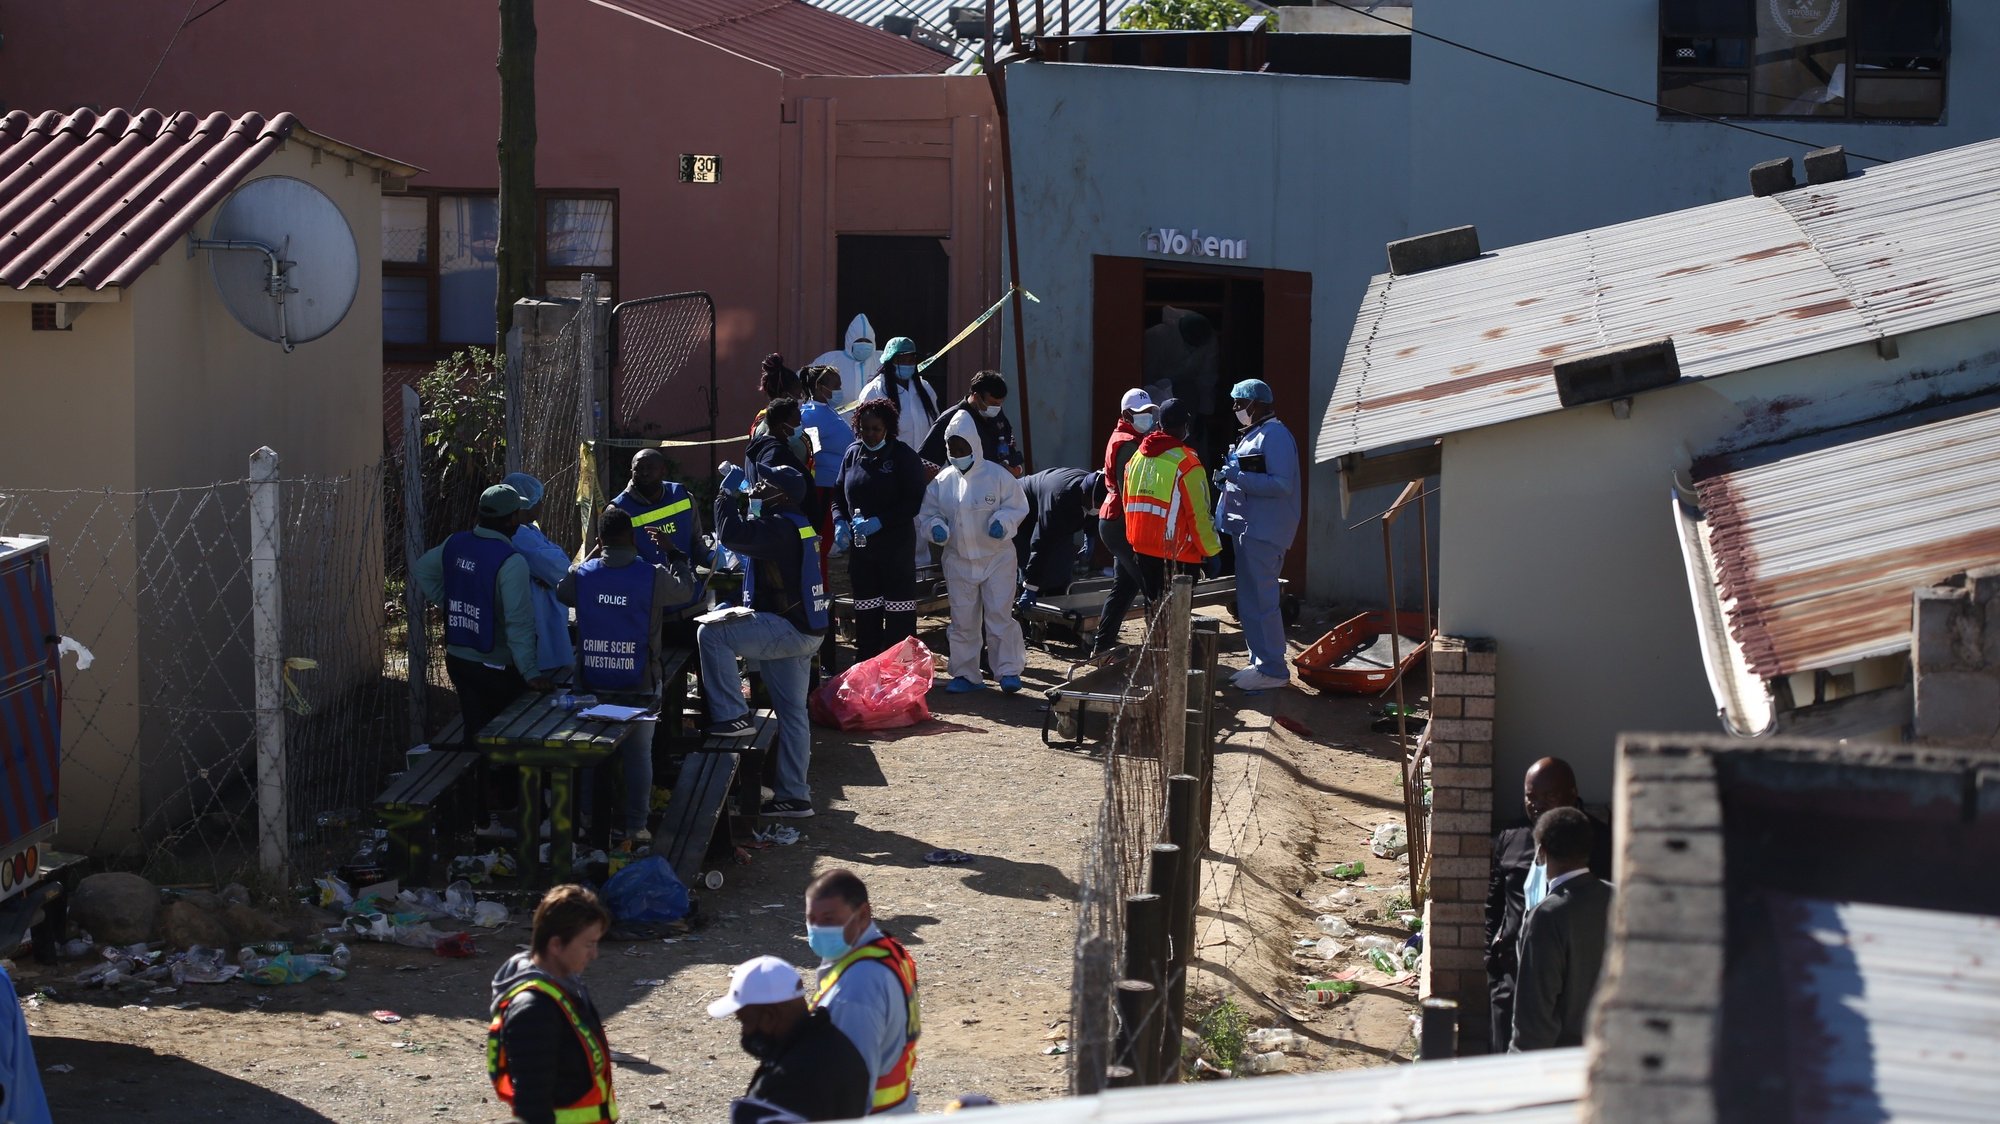 epa10034985 South African Police Forces (SAPS) and forensics experts work at the scene where an estimated 20 young people died in Enyobeni Tavern in East London, South Africa, 26 June 2022. The cause of death of the youngsters is yet to be established as 20 people died and 3 others have been hospitalized after an apparent party occurred overnight at the tavern.  EPA/STR